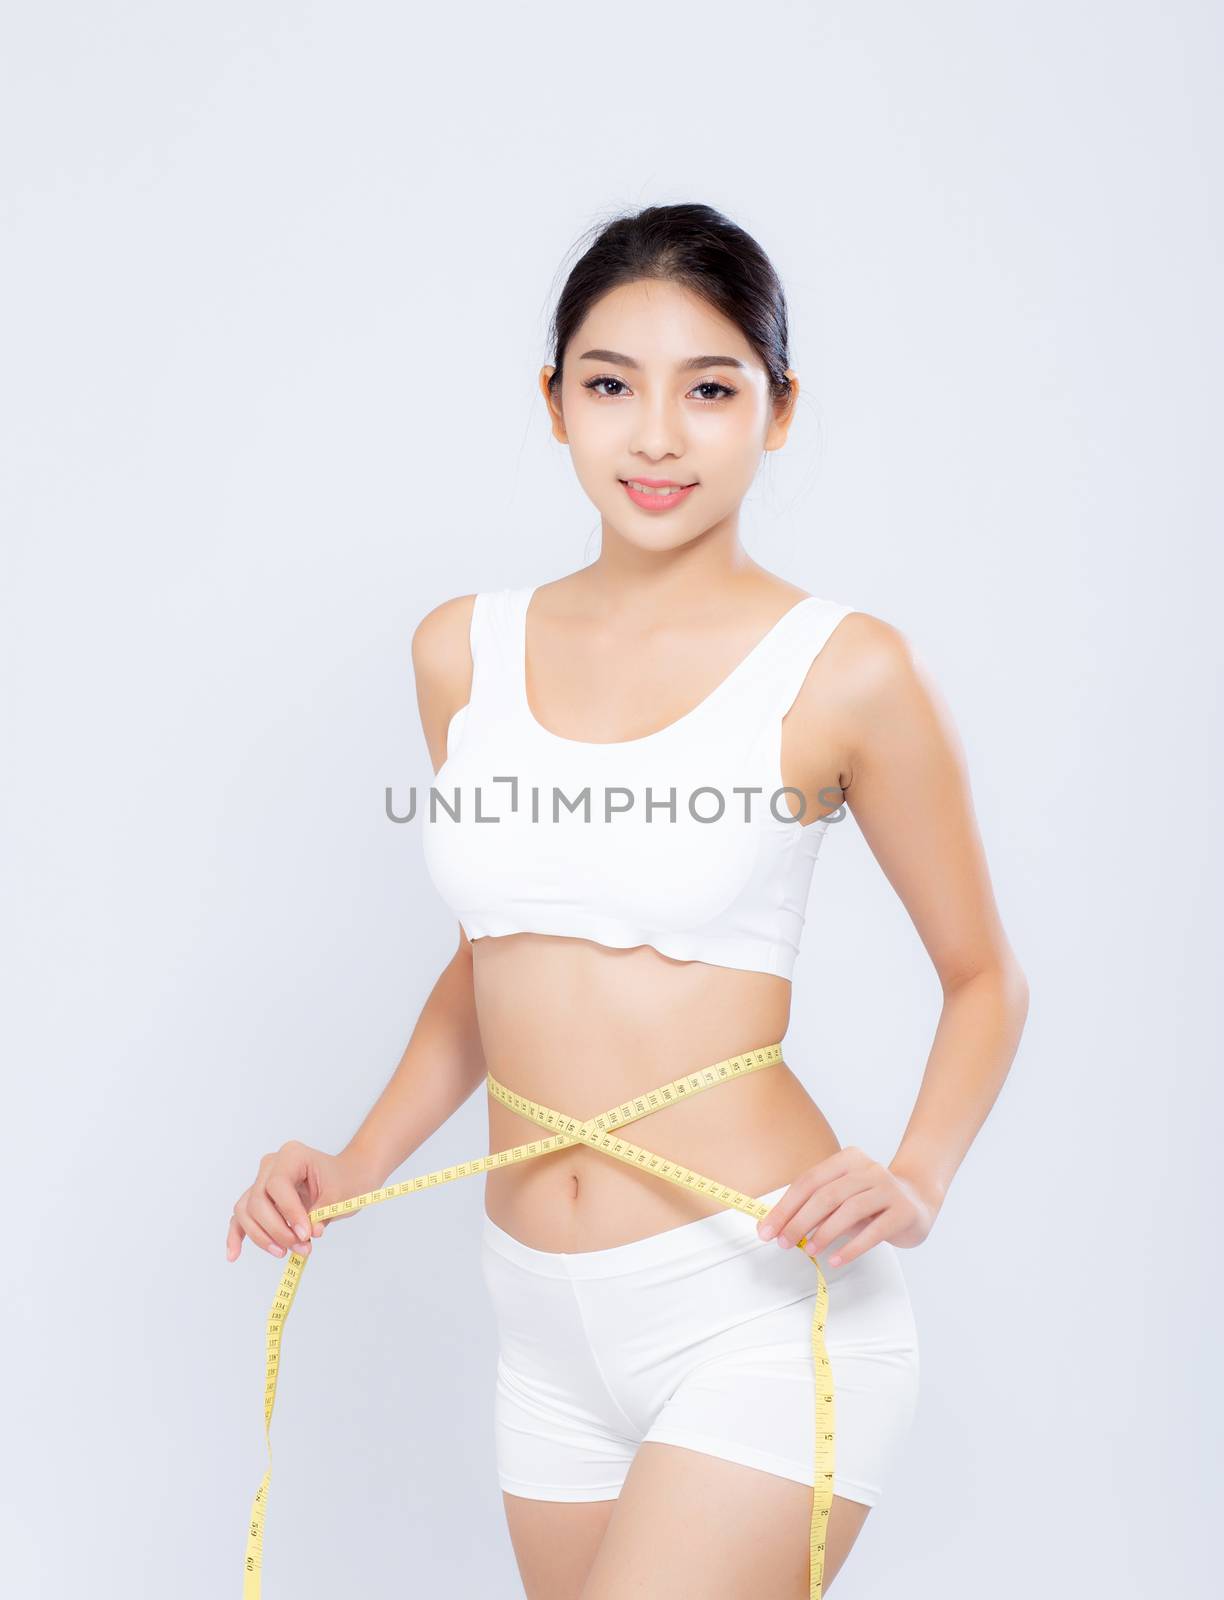 beautiful portrait asian woman diet and slim with measuring waist for weight isolated on white background, girl have cellulite and calories loss with tape measure, health and wellness concept.